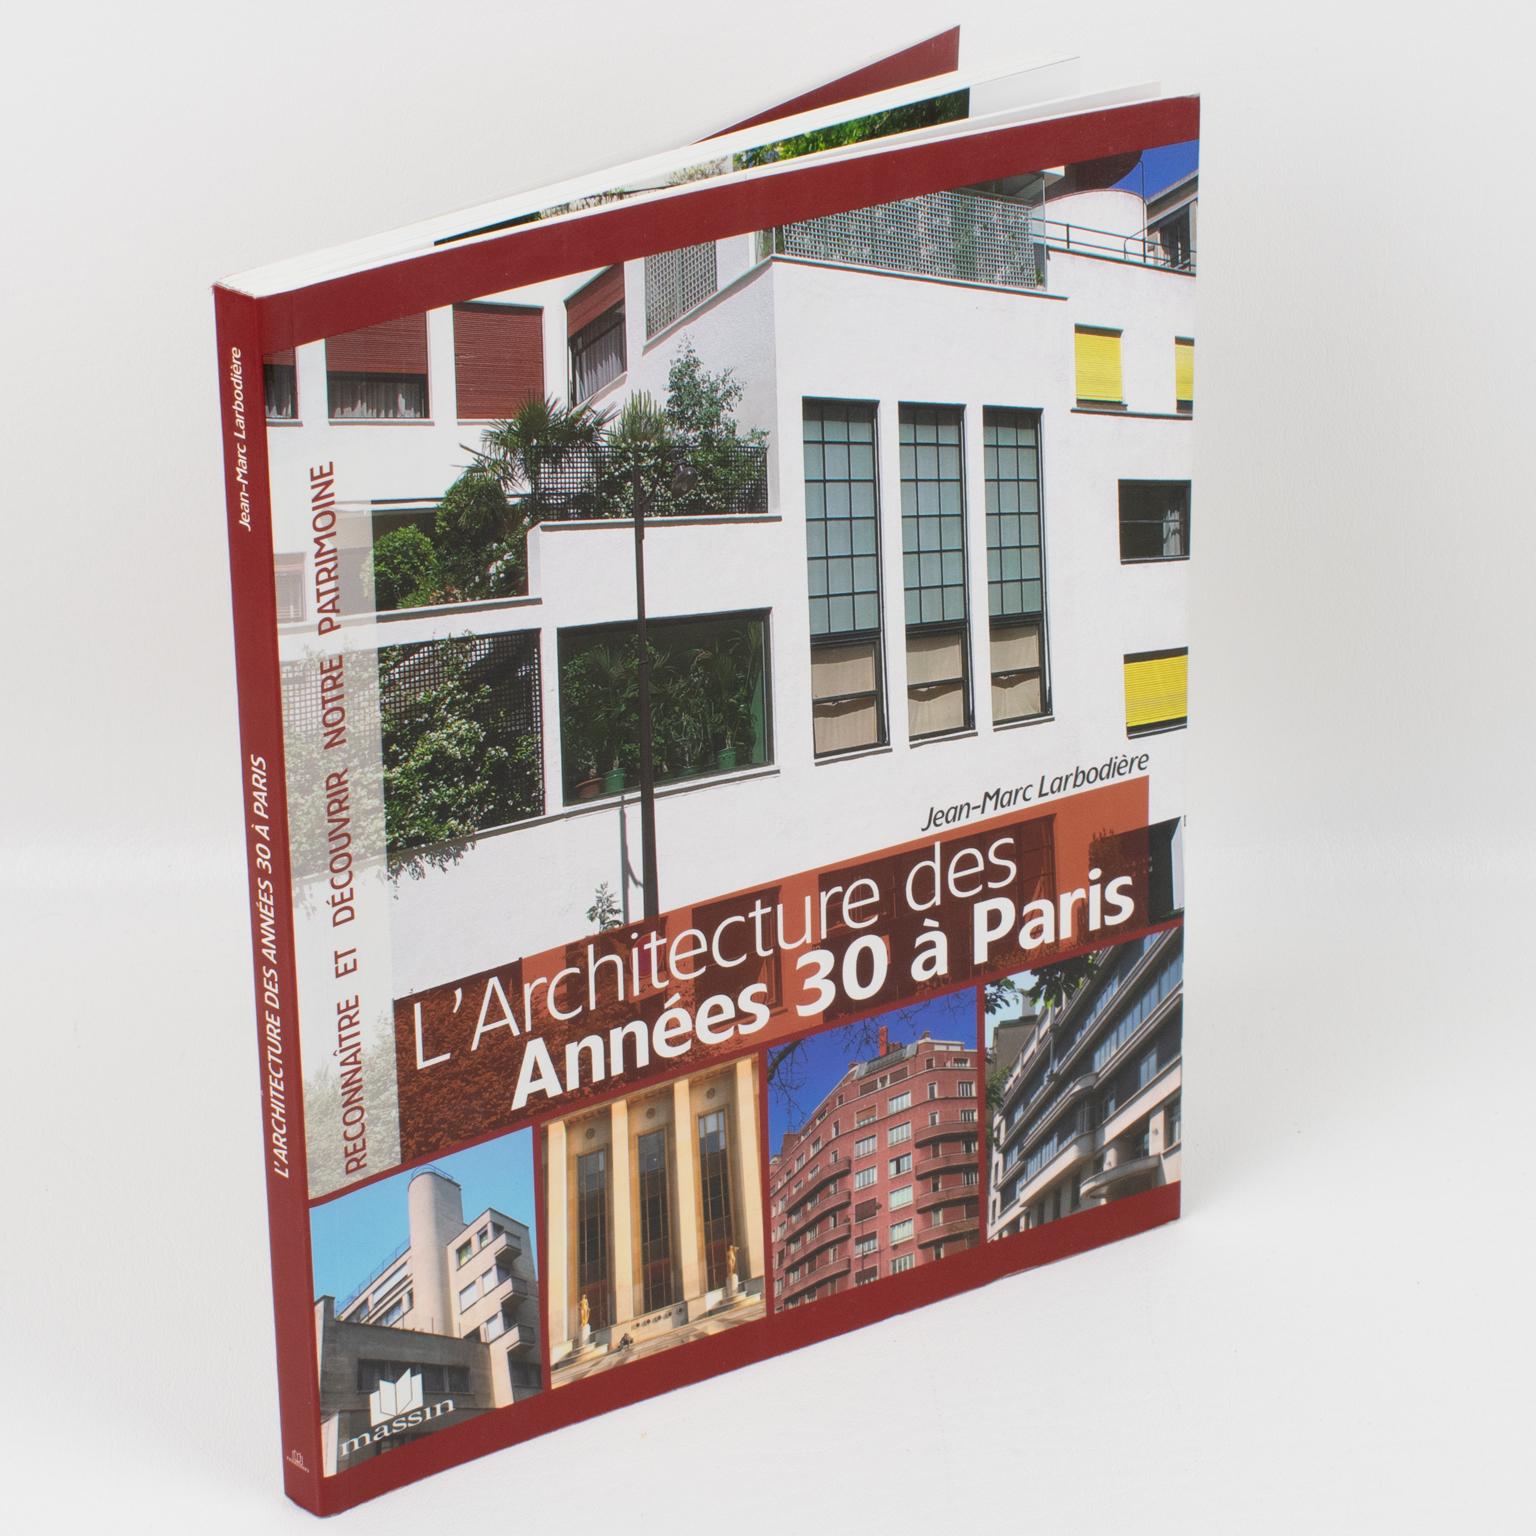 L'Architecture des Années 30 a Paris (1930s Architecture in Paris), French book by Jean-Marc Larbodiere.
The International Style comes from the Modern Movement (Bauhaus in Germany, Le Corbusier, and the Esprit Nouveau in France), an extension of Art